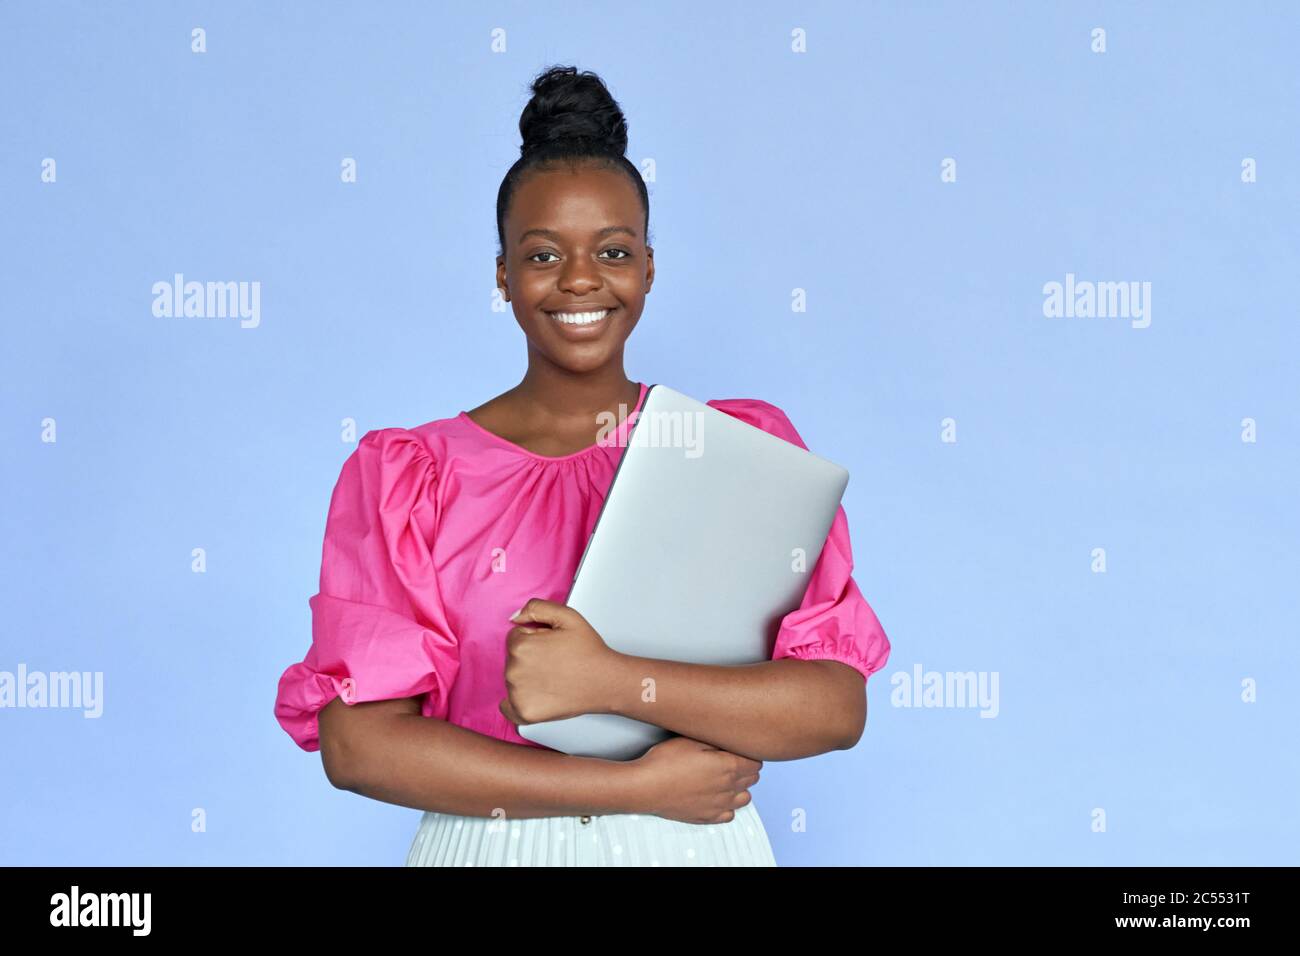 Smiling african woman student hold laptop look at camera on violet background. Stock Photo